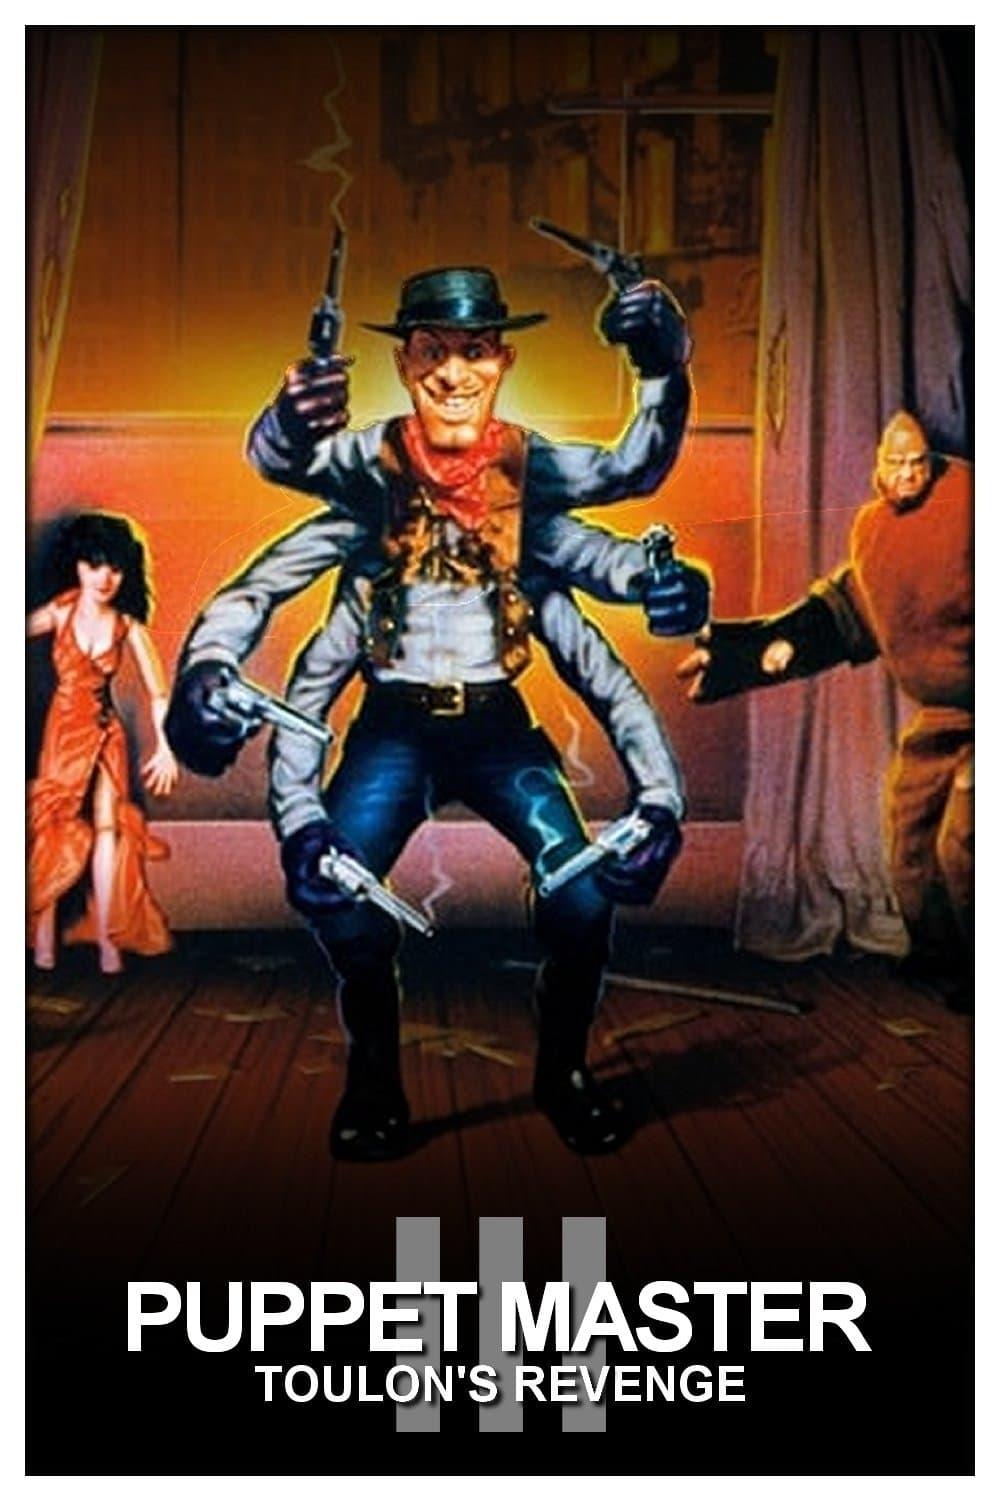 Puppet Master III poster